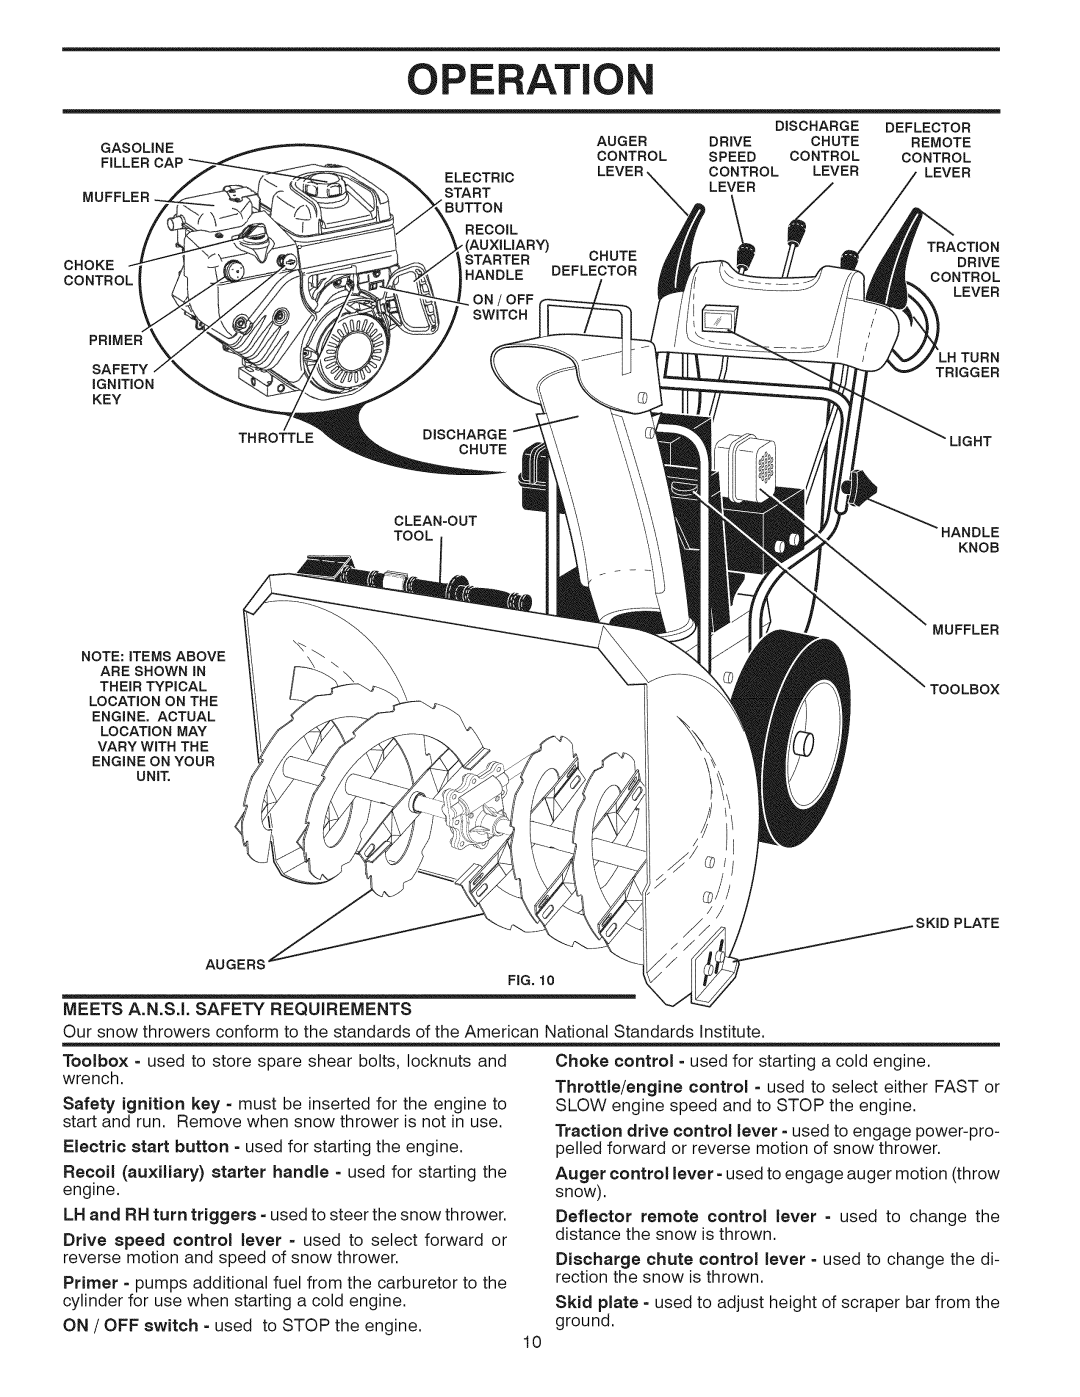 Craftsman 944.528398 owner manual Operati, Meets A.N.S.I. Safety Requirements 